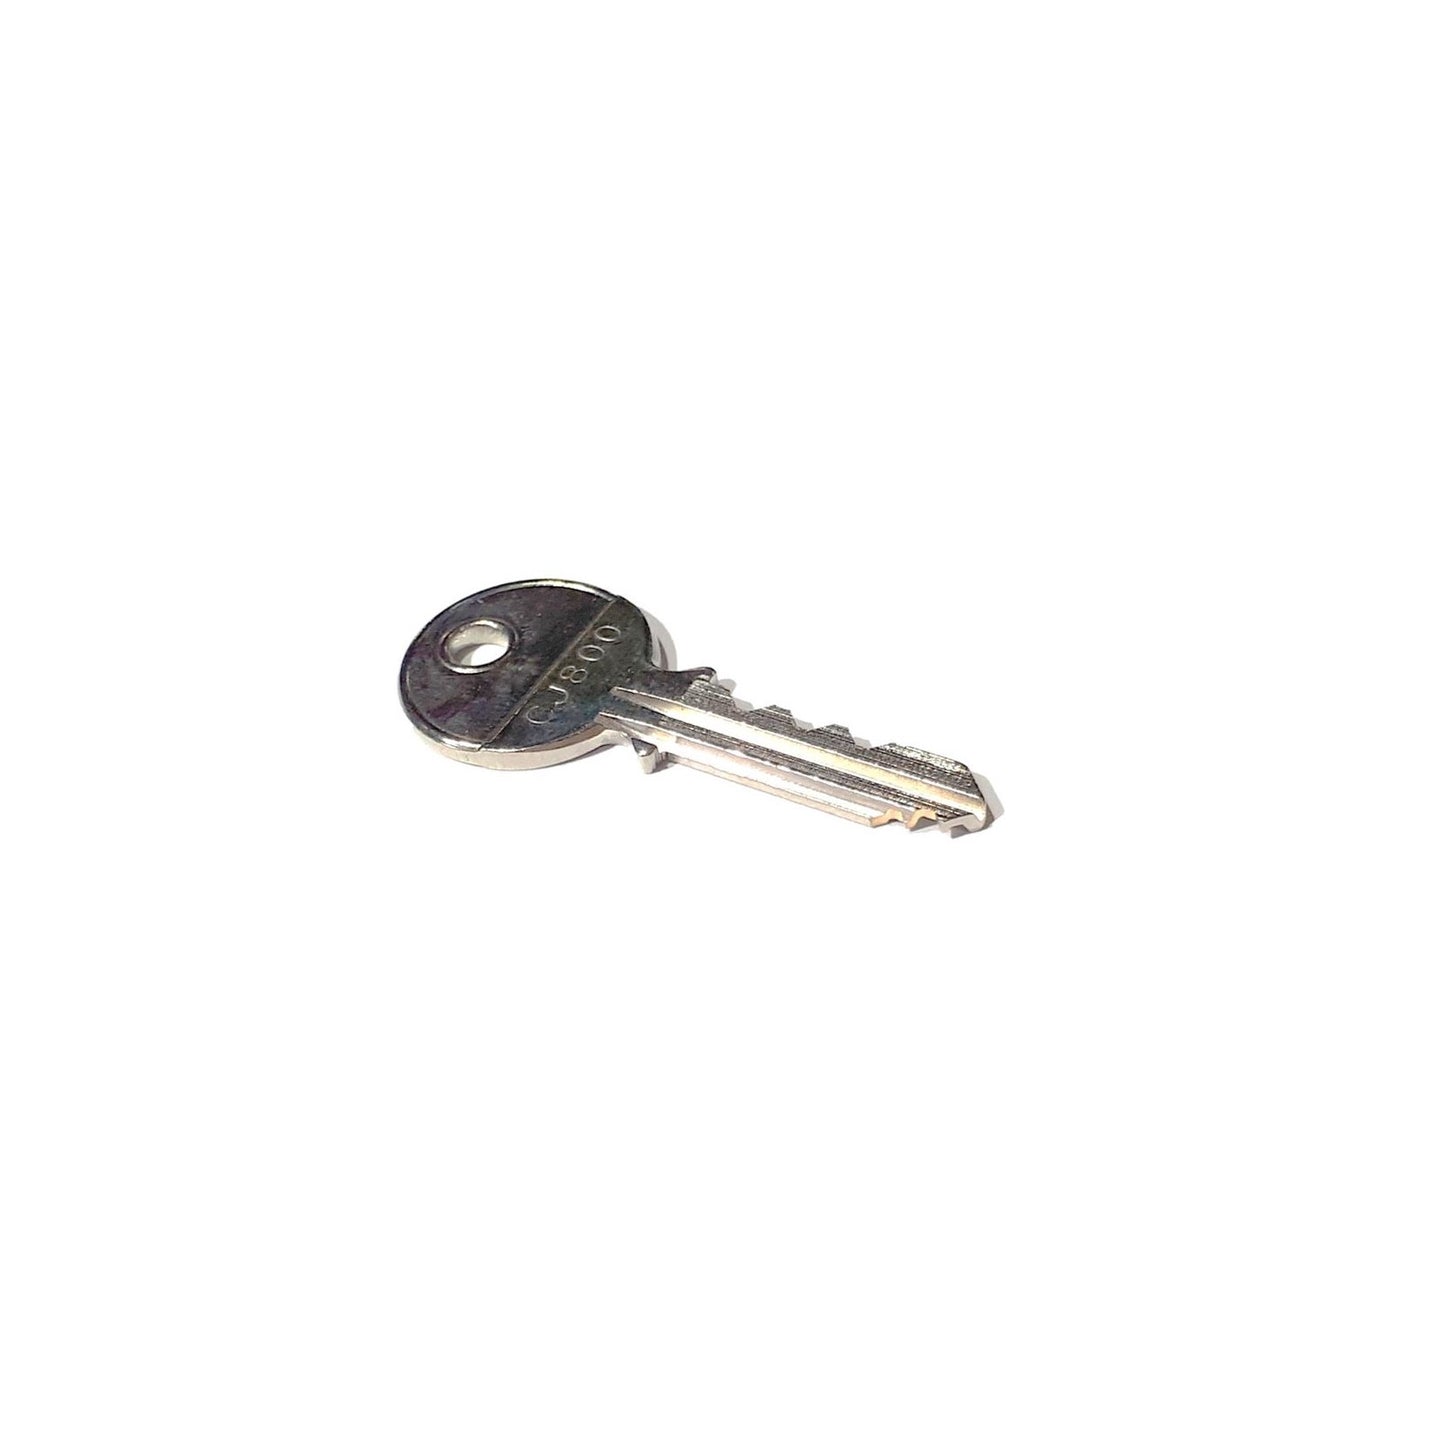 Master Key for Coin Operated Lock